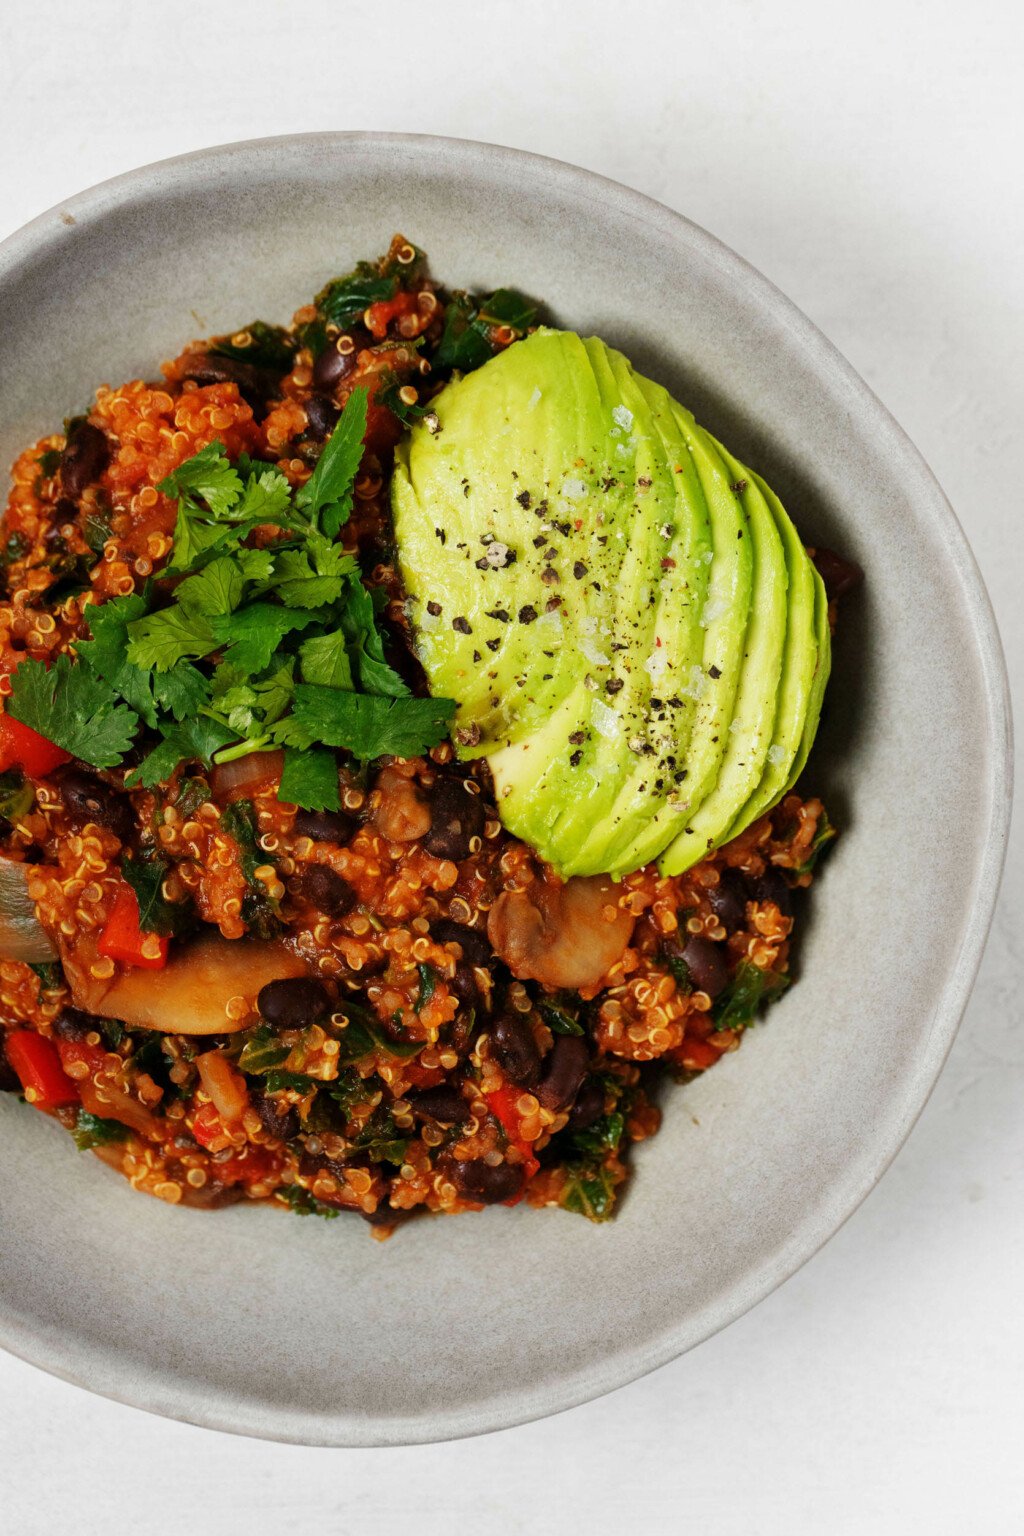 A vegan quinoa black bean chili has been served in a round bowl, resting on a white surface. It's topped with herbs and avocado.